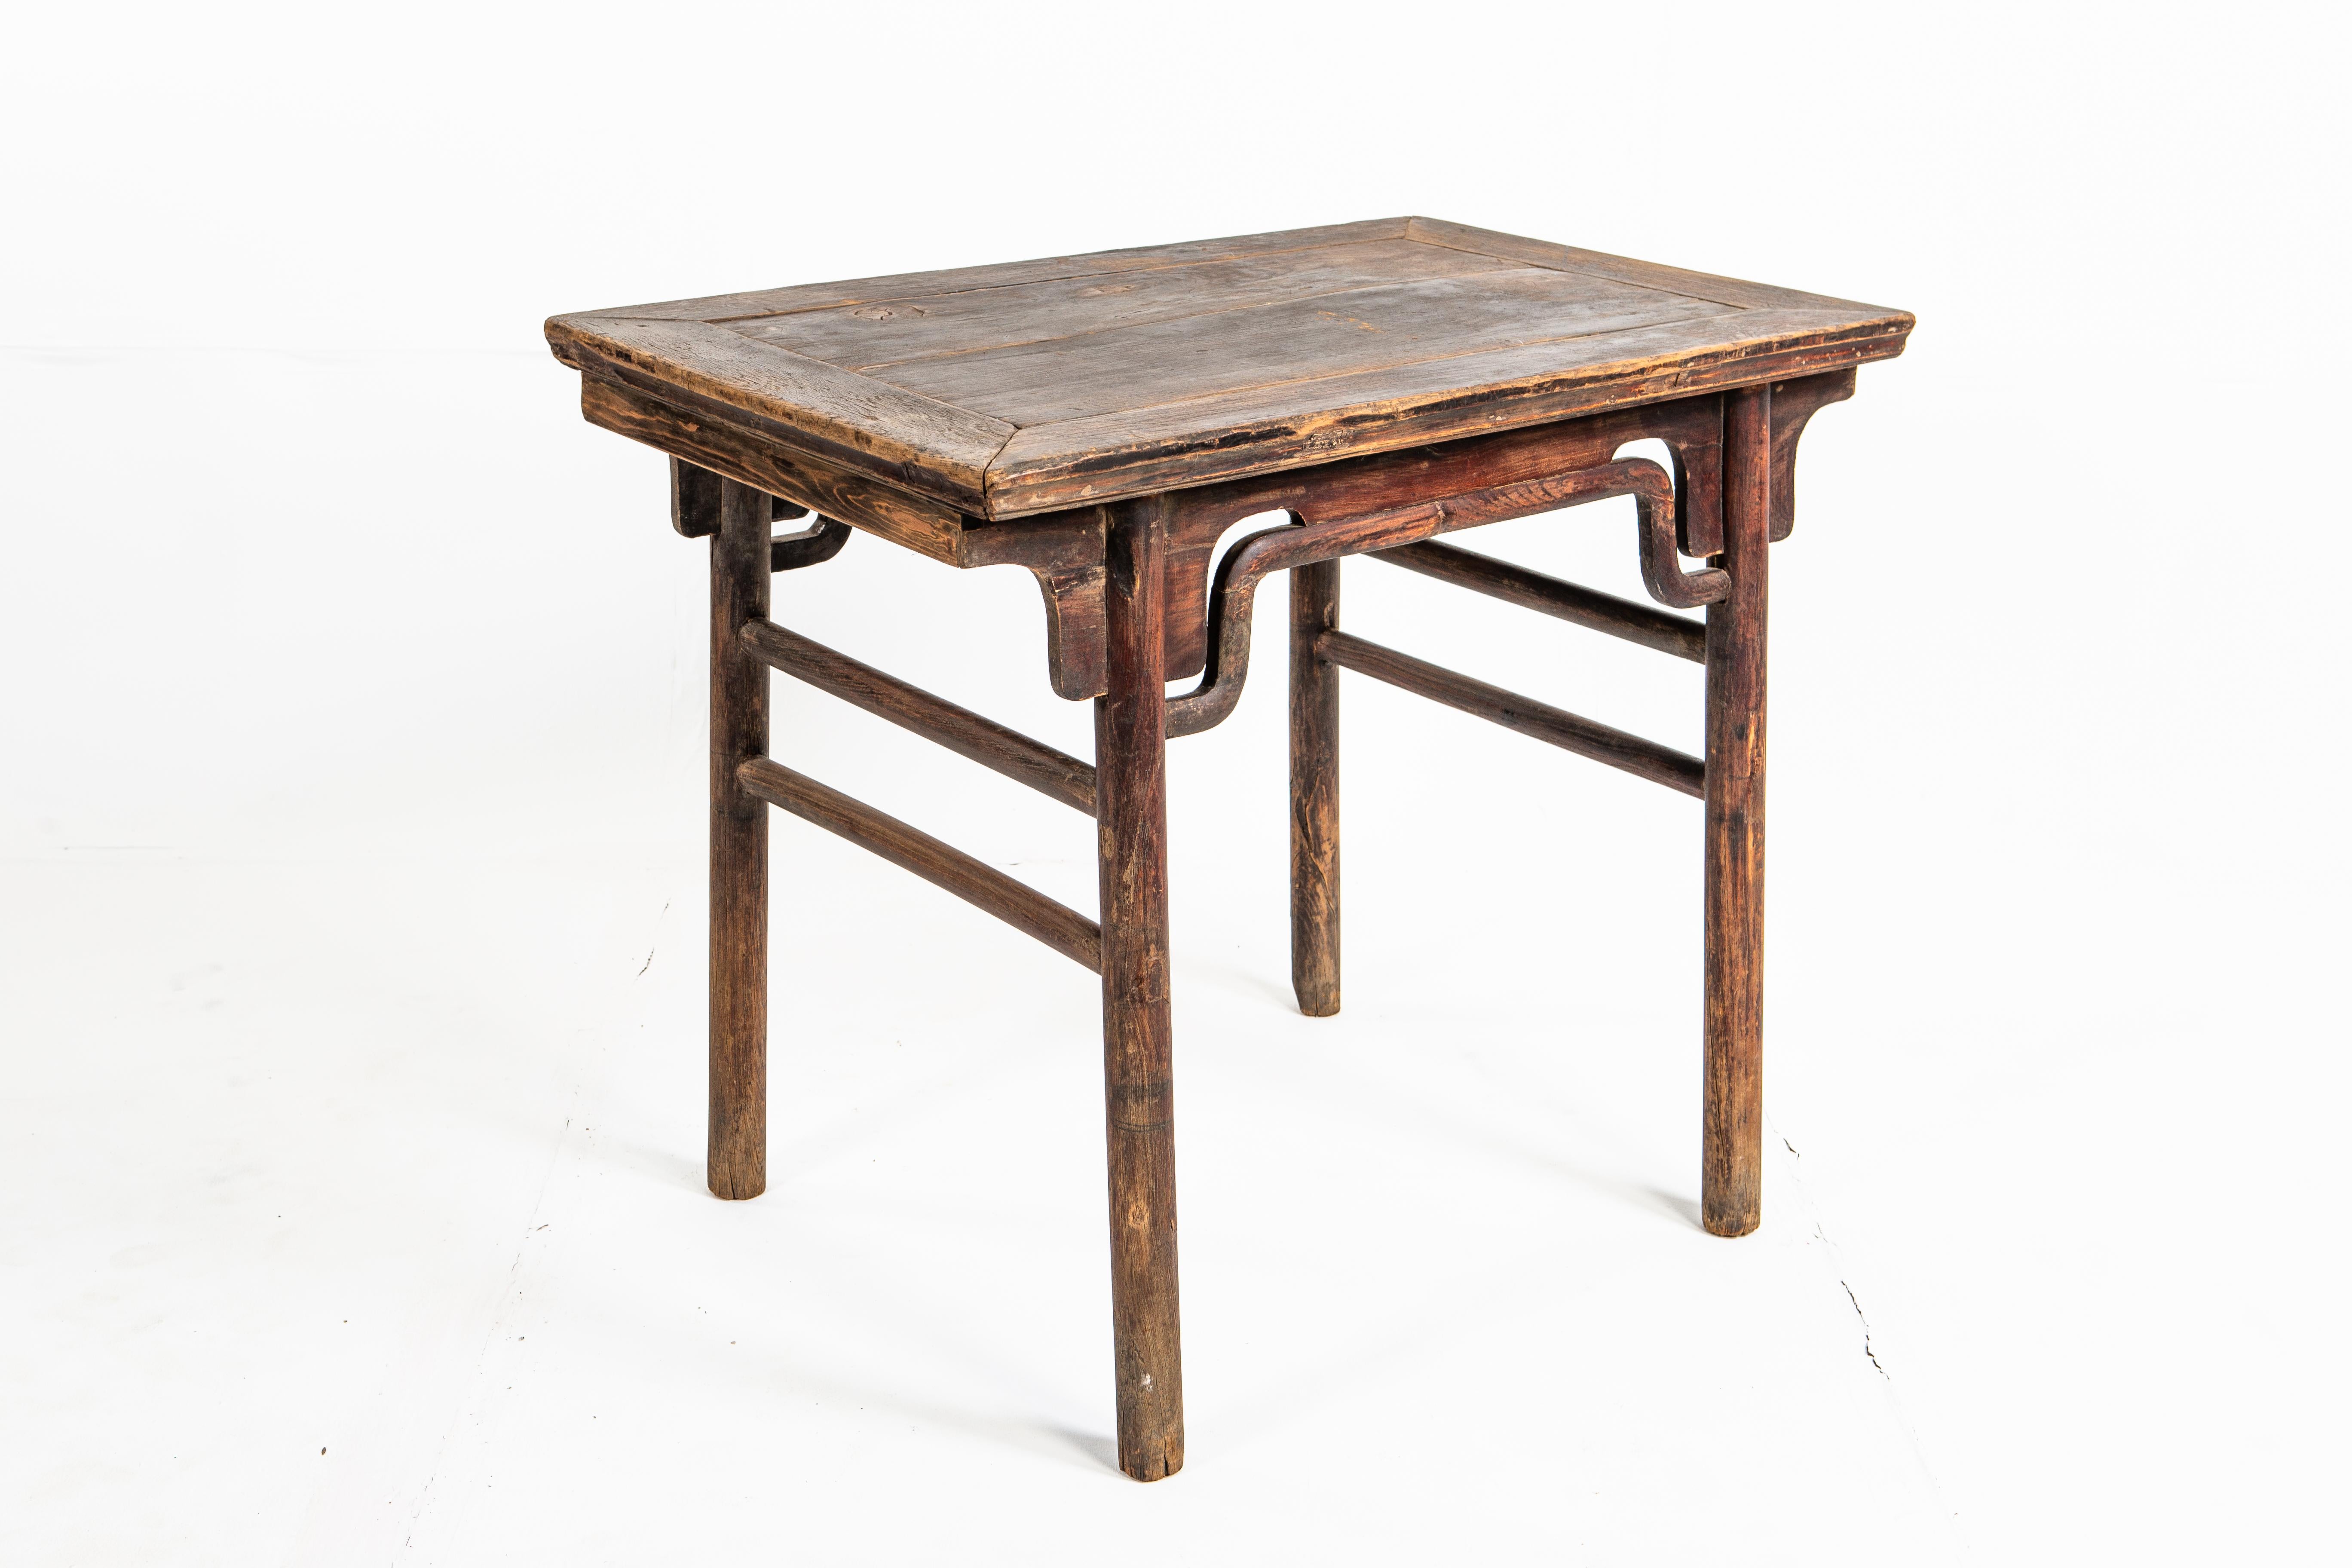 Early Qing Dynasty Painting Table (Chinesisch)